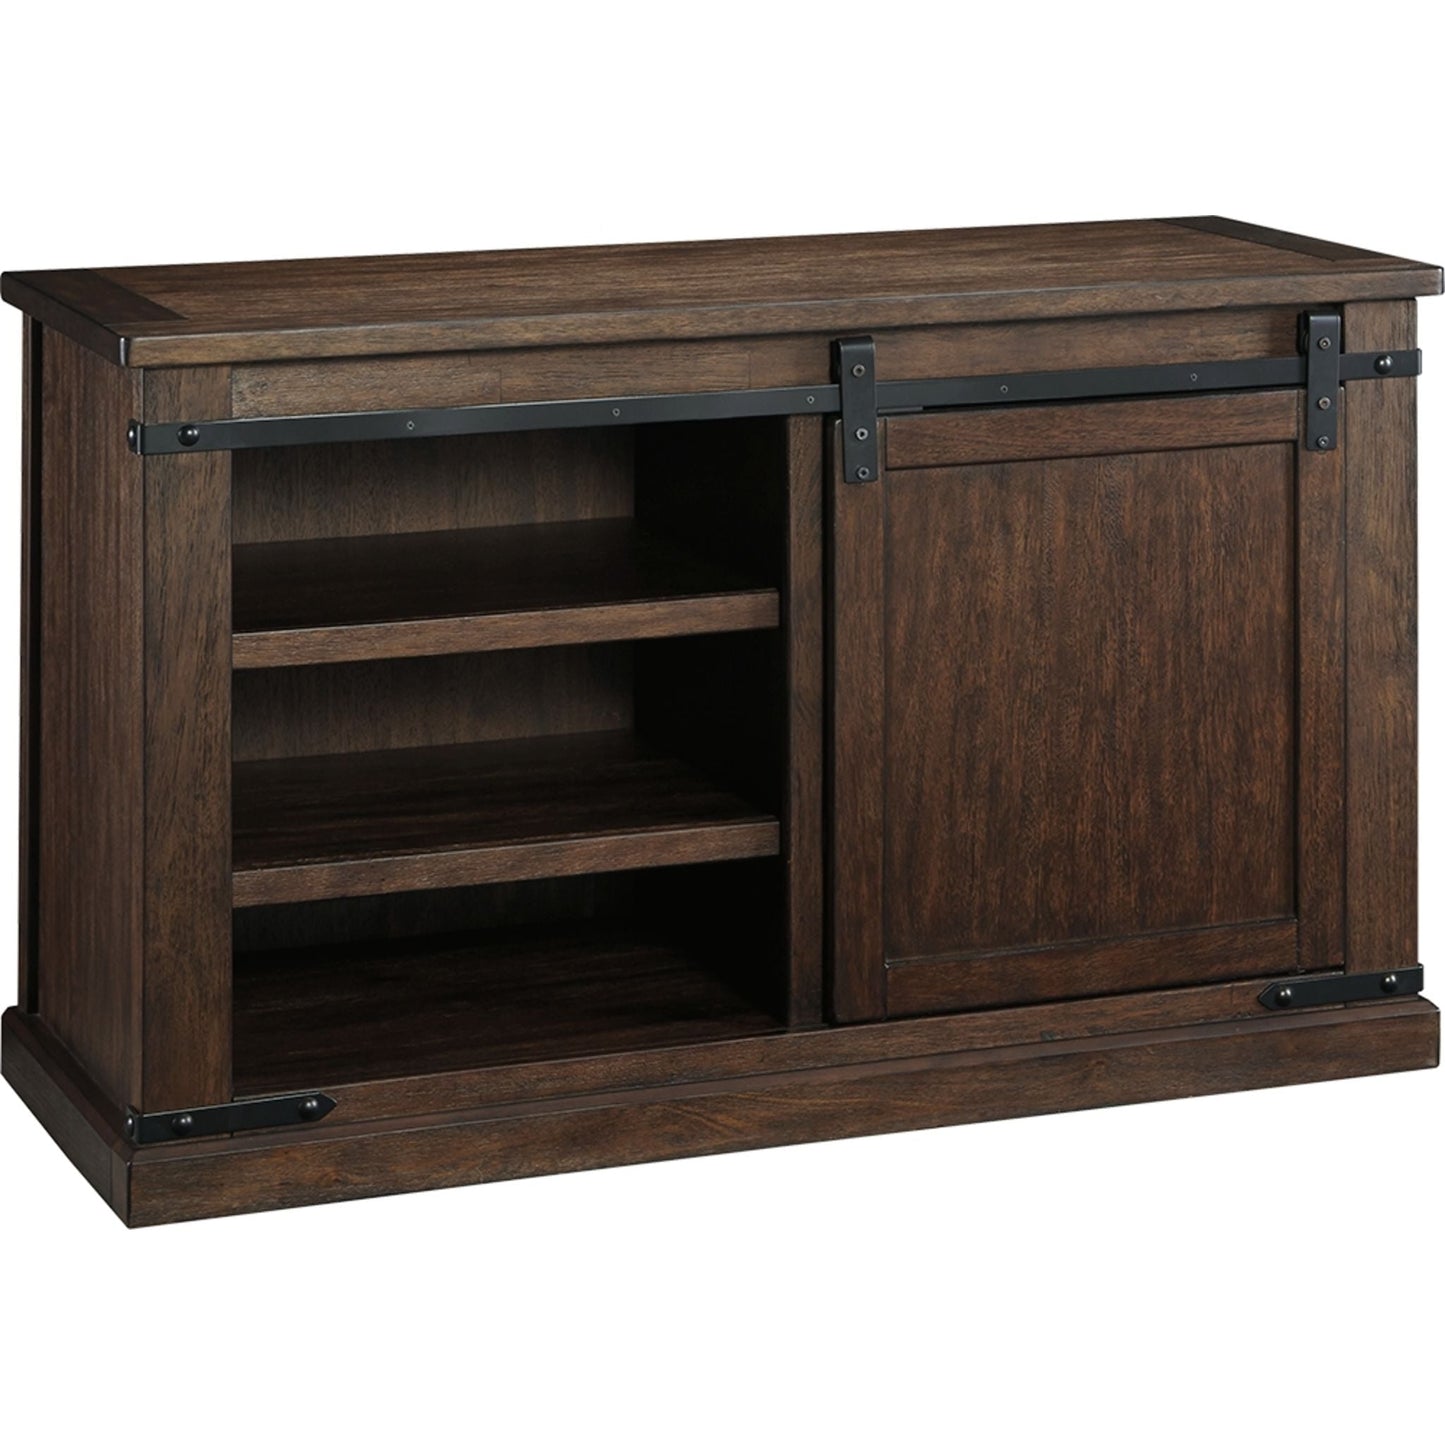 Budmore TV Stand - Rustic Brown